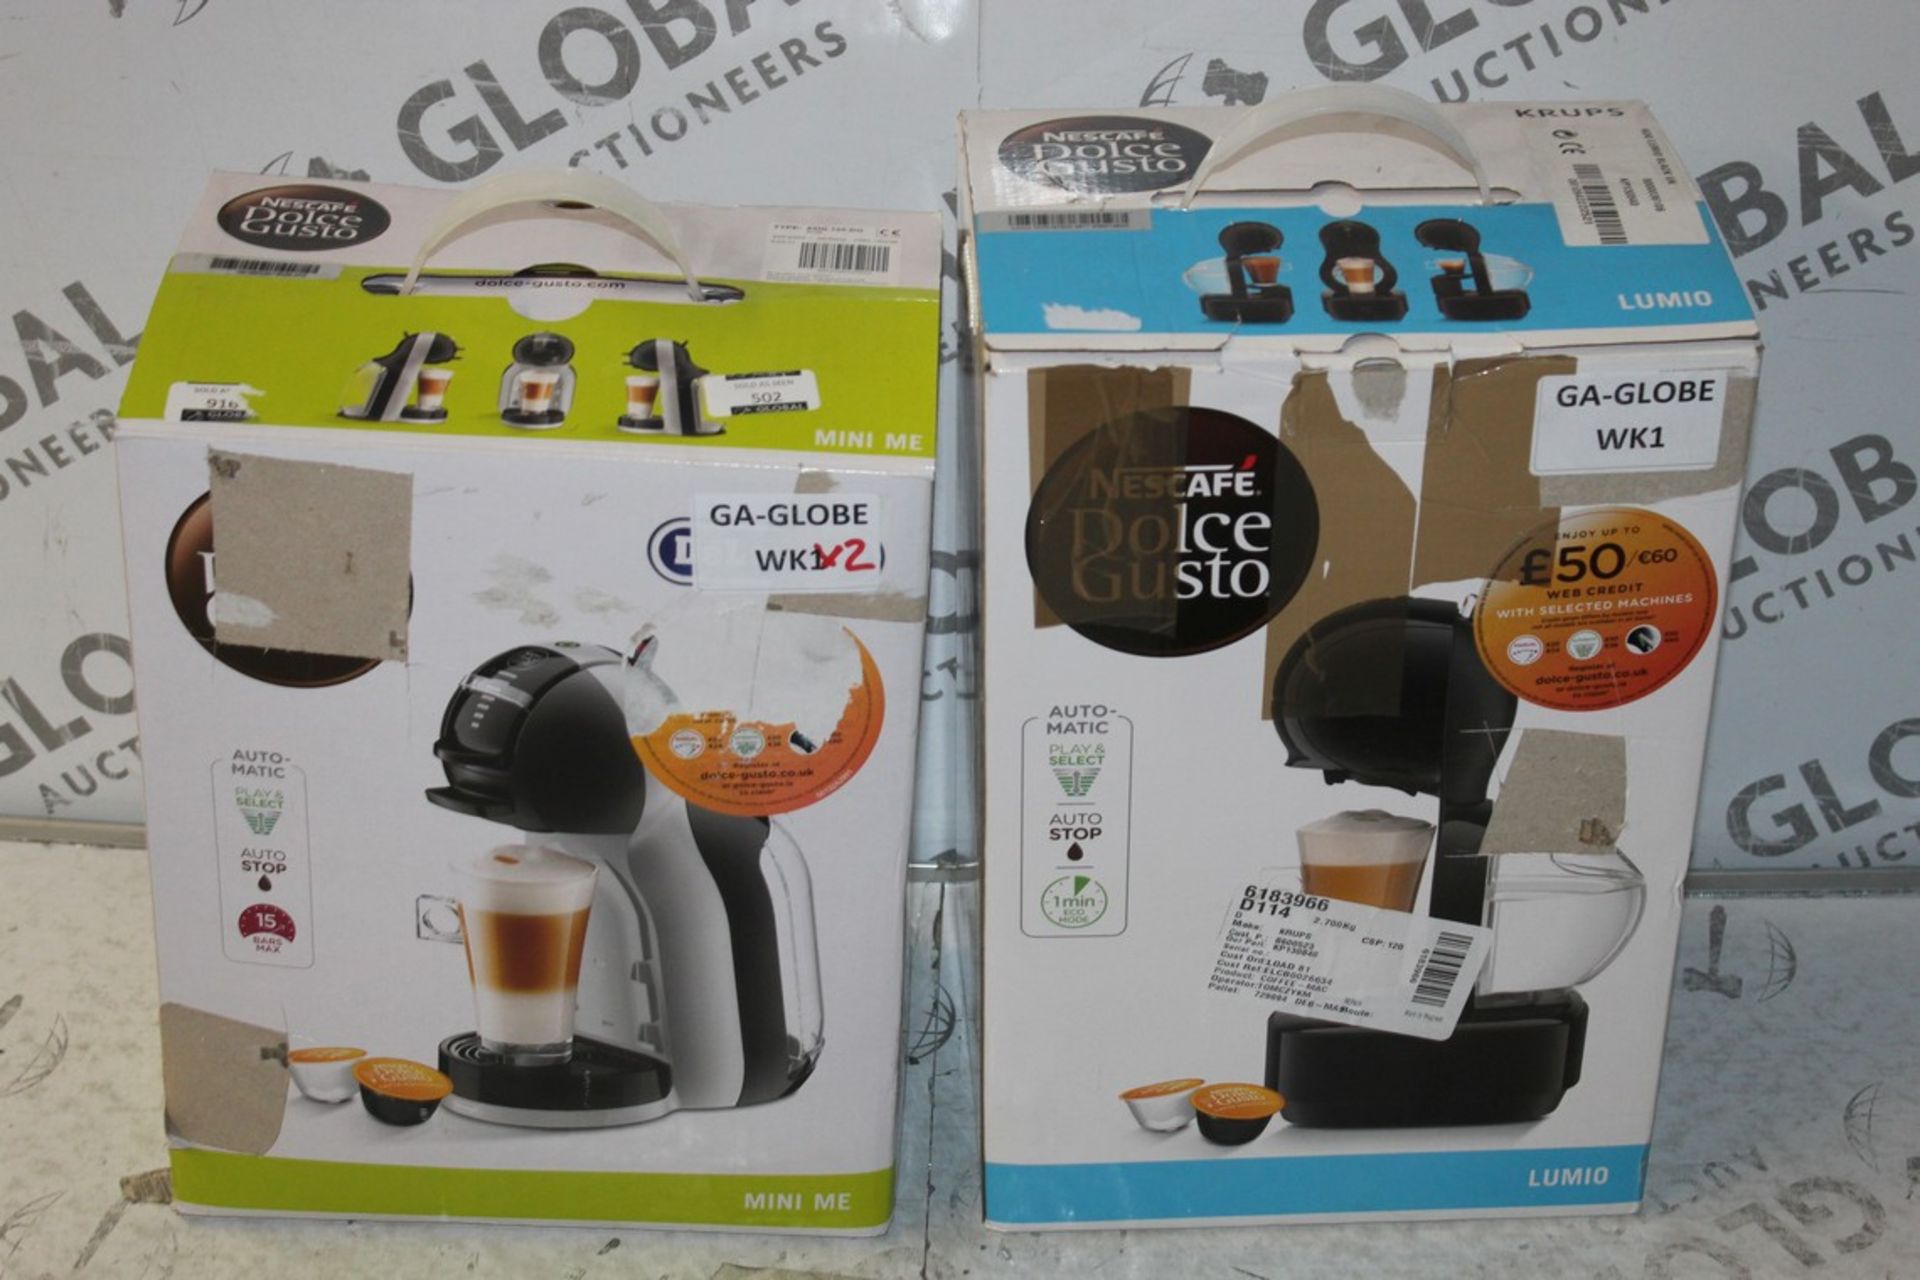 Boxed Delonghi Nescafe Dolce Gusto Coffee Machines, RRP£60-80.00 EACH (Untested Customer Returns) (